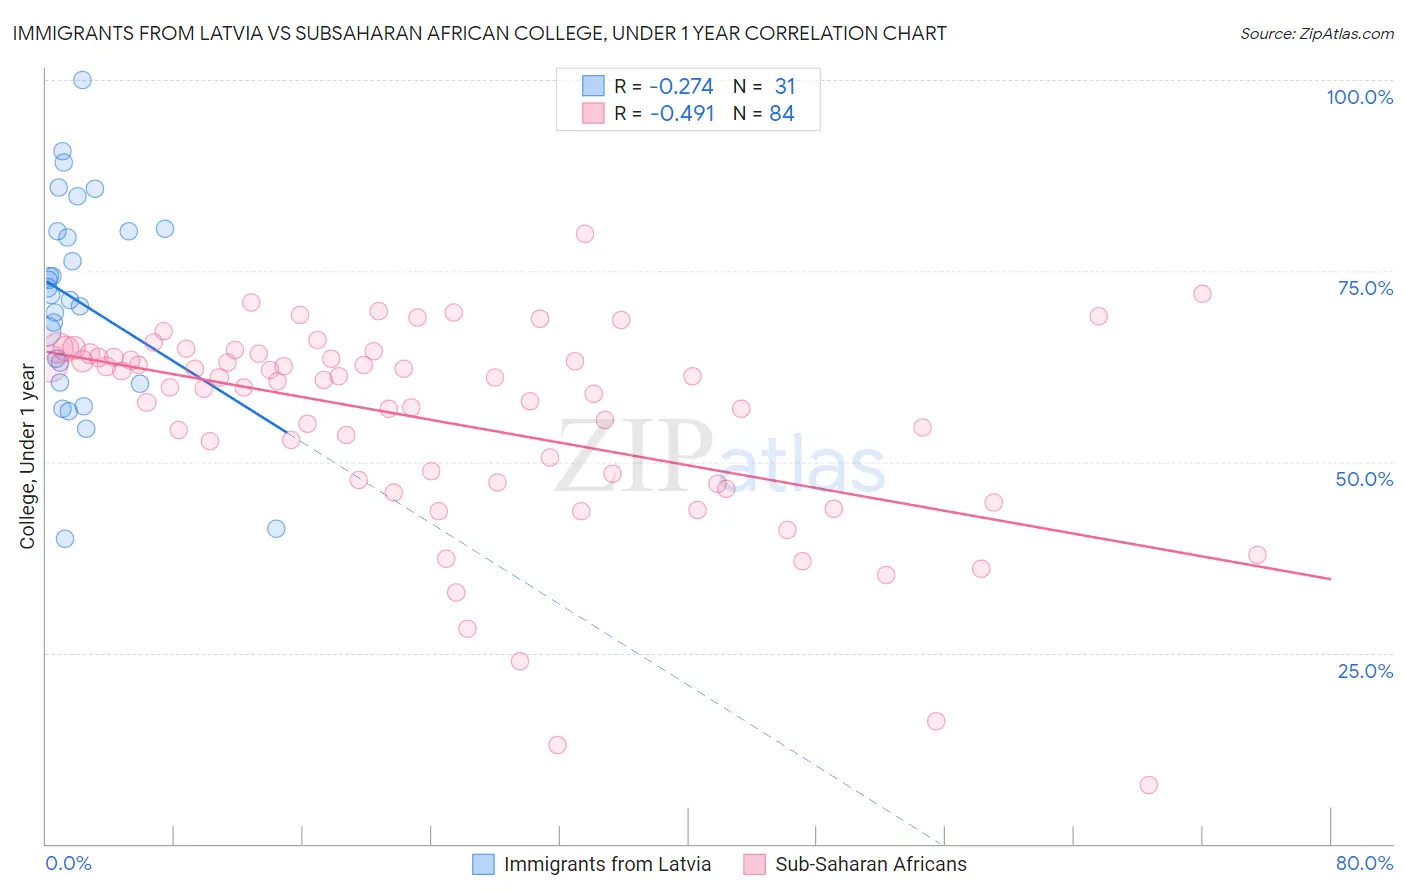 Immigrants from Latvia vs Subsaharan African College, Under 1 year